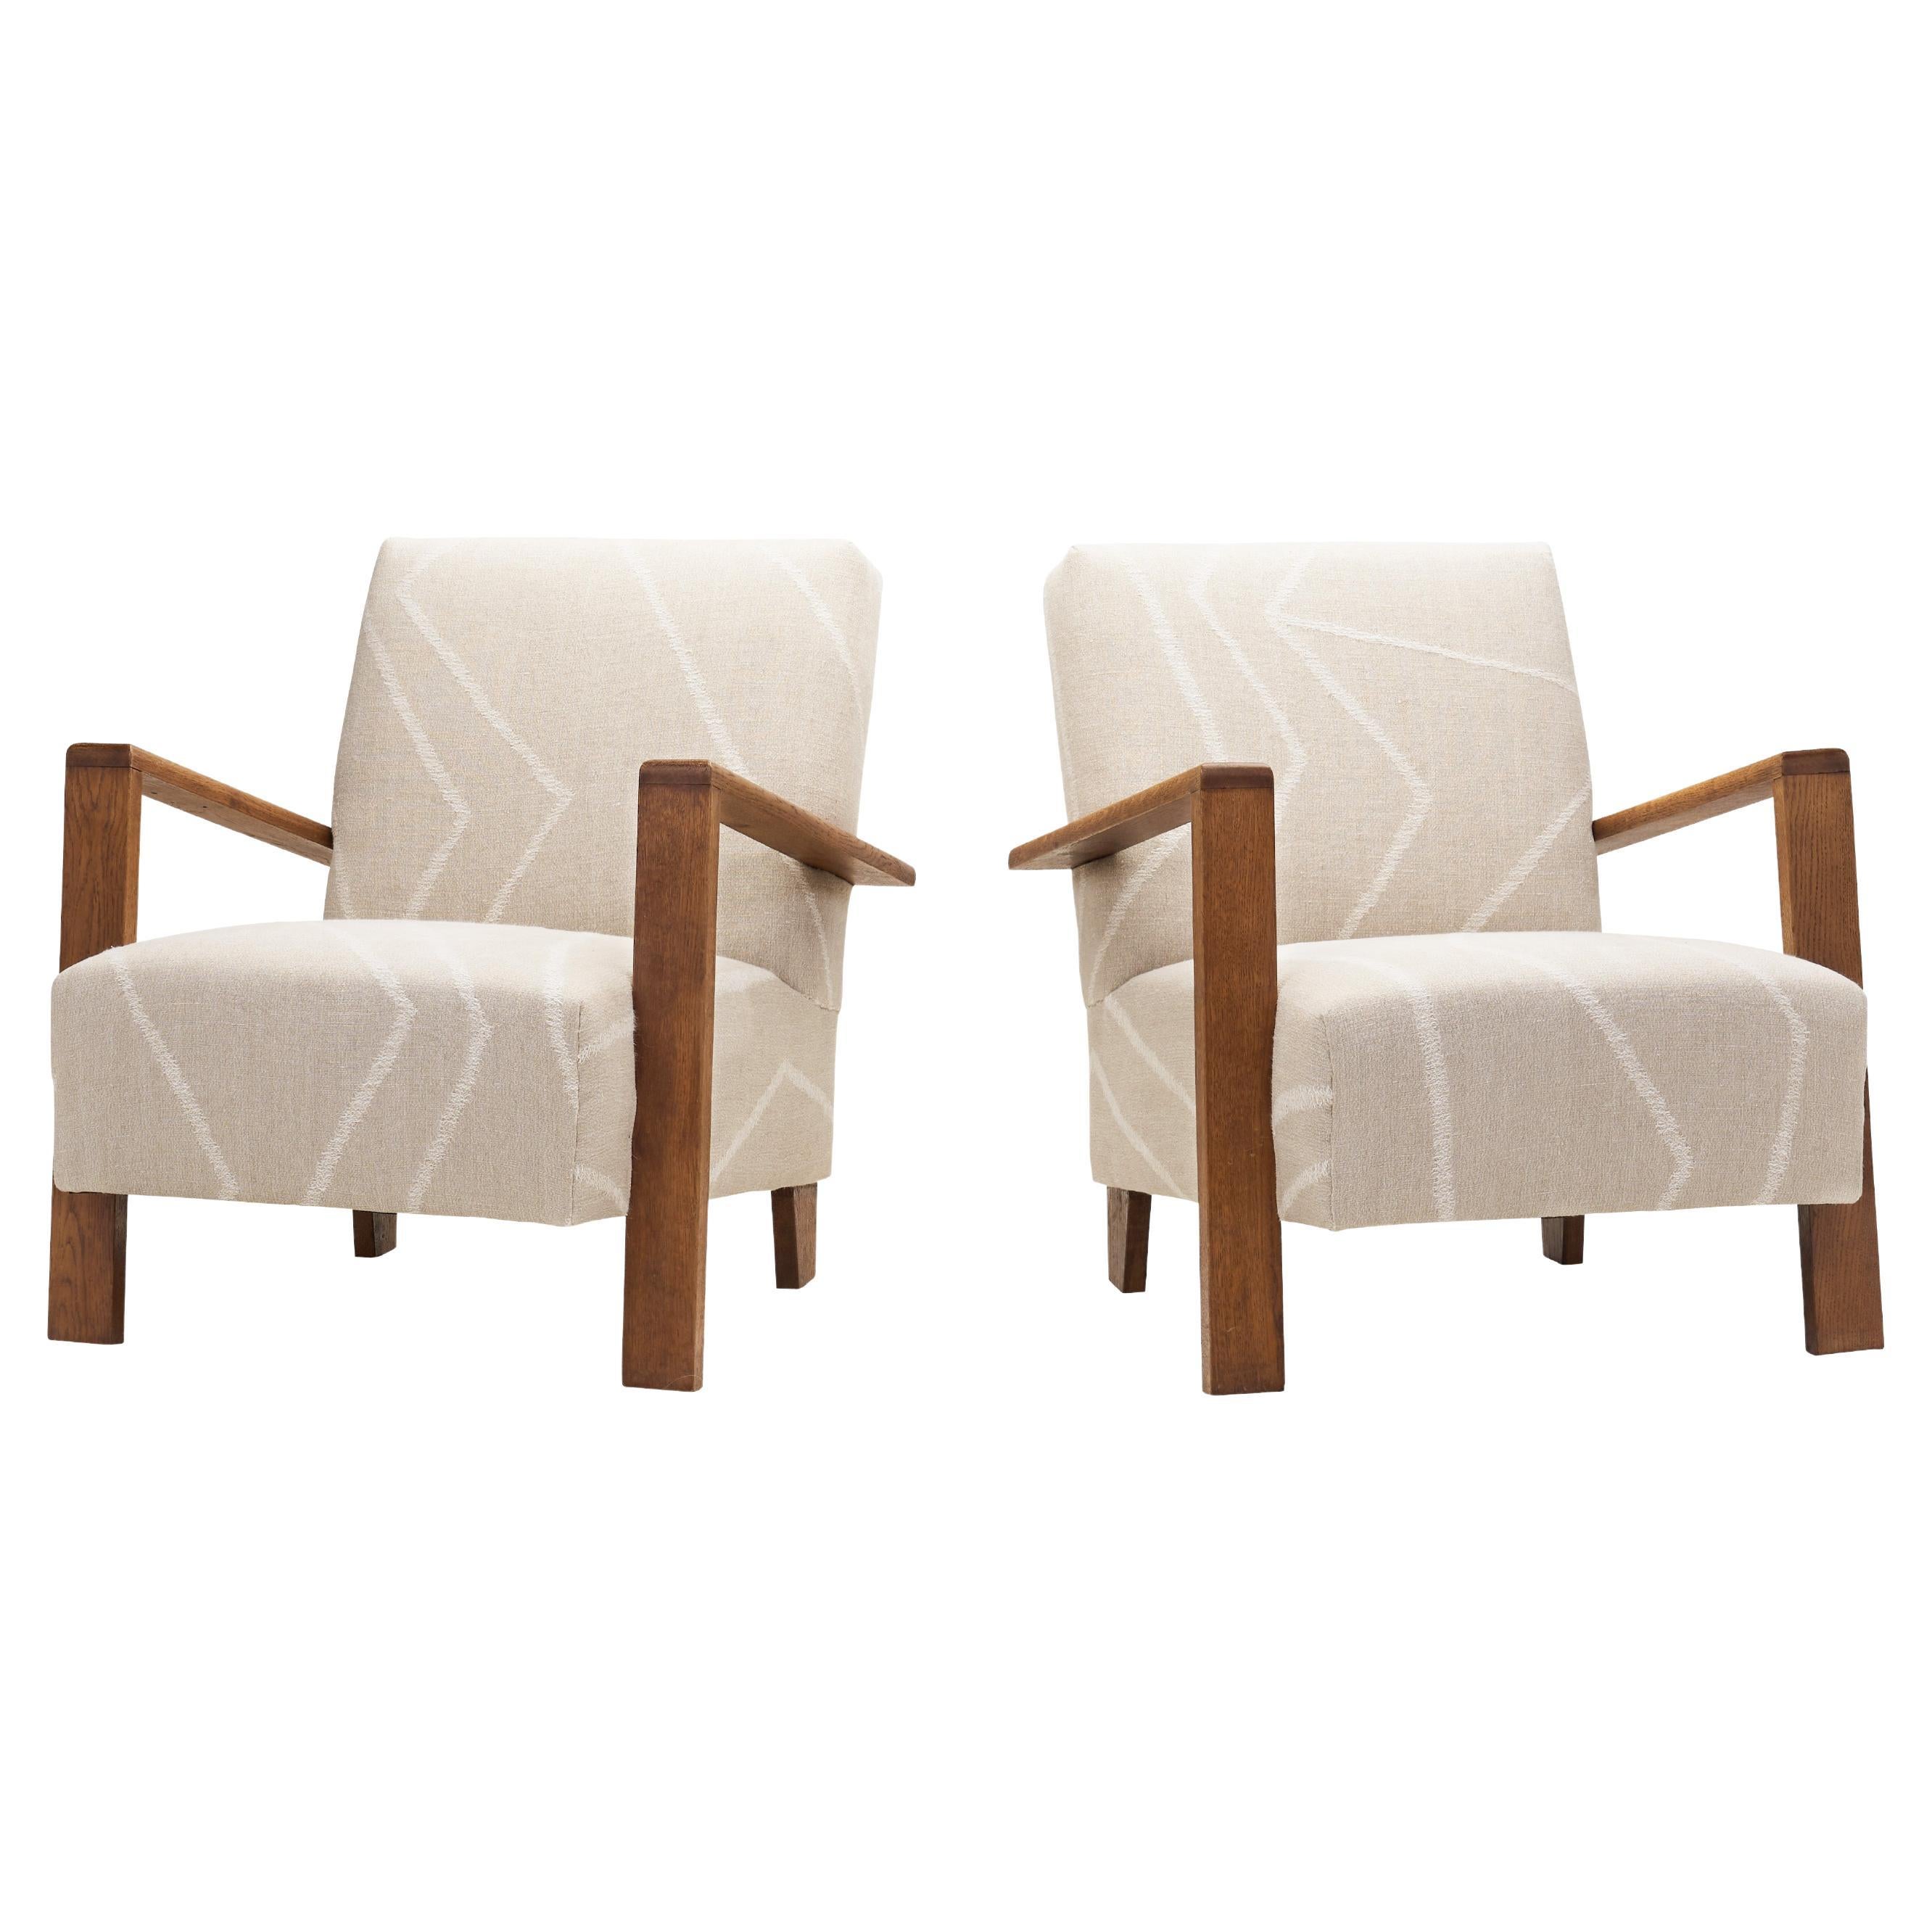 A Pair of Haagse School Art Deco Lounge Chairs, The Netherlands 1930s For Sale